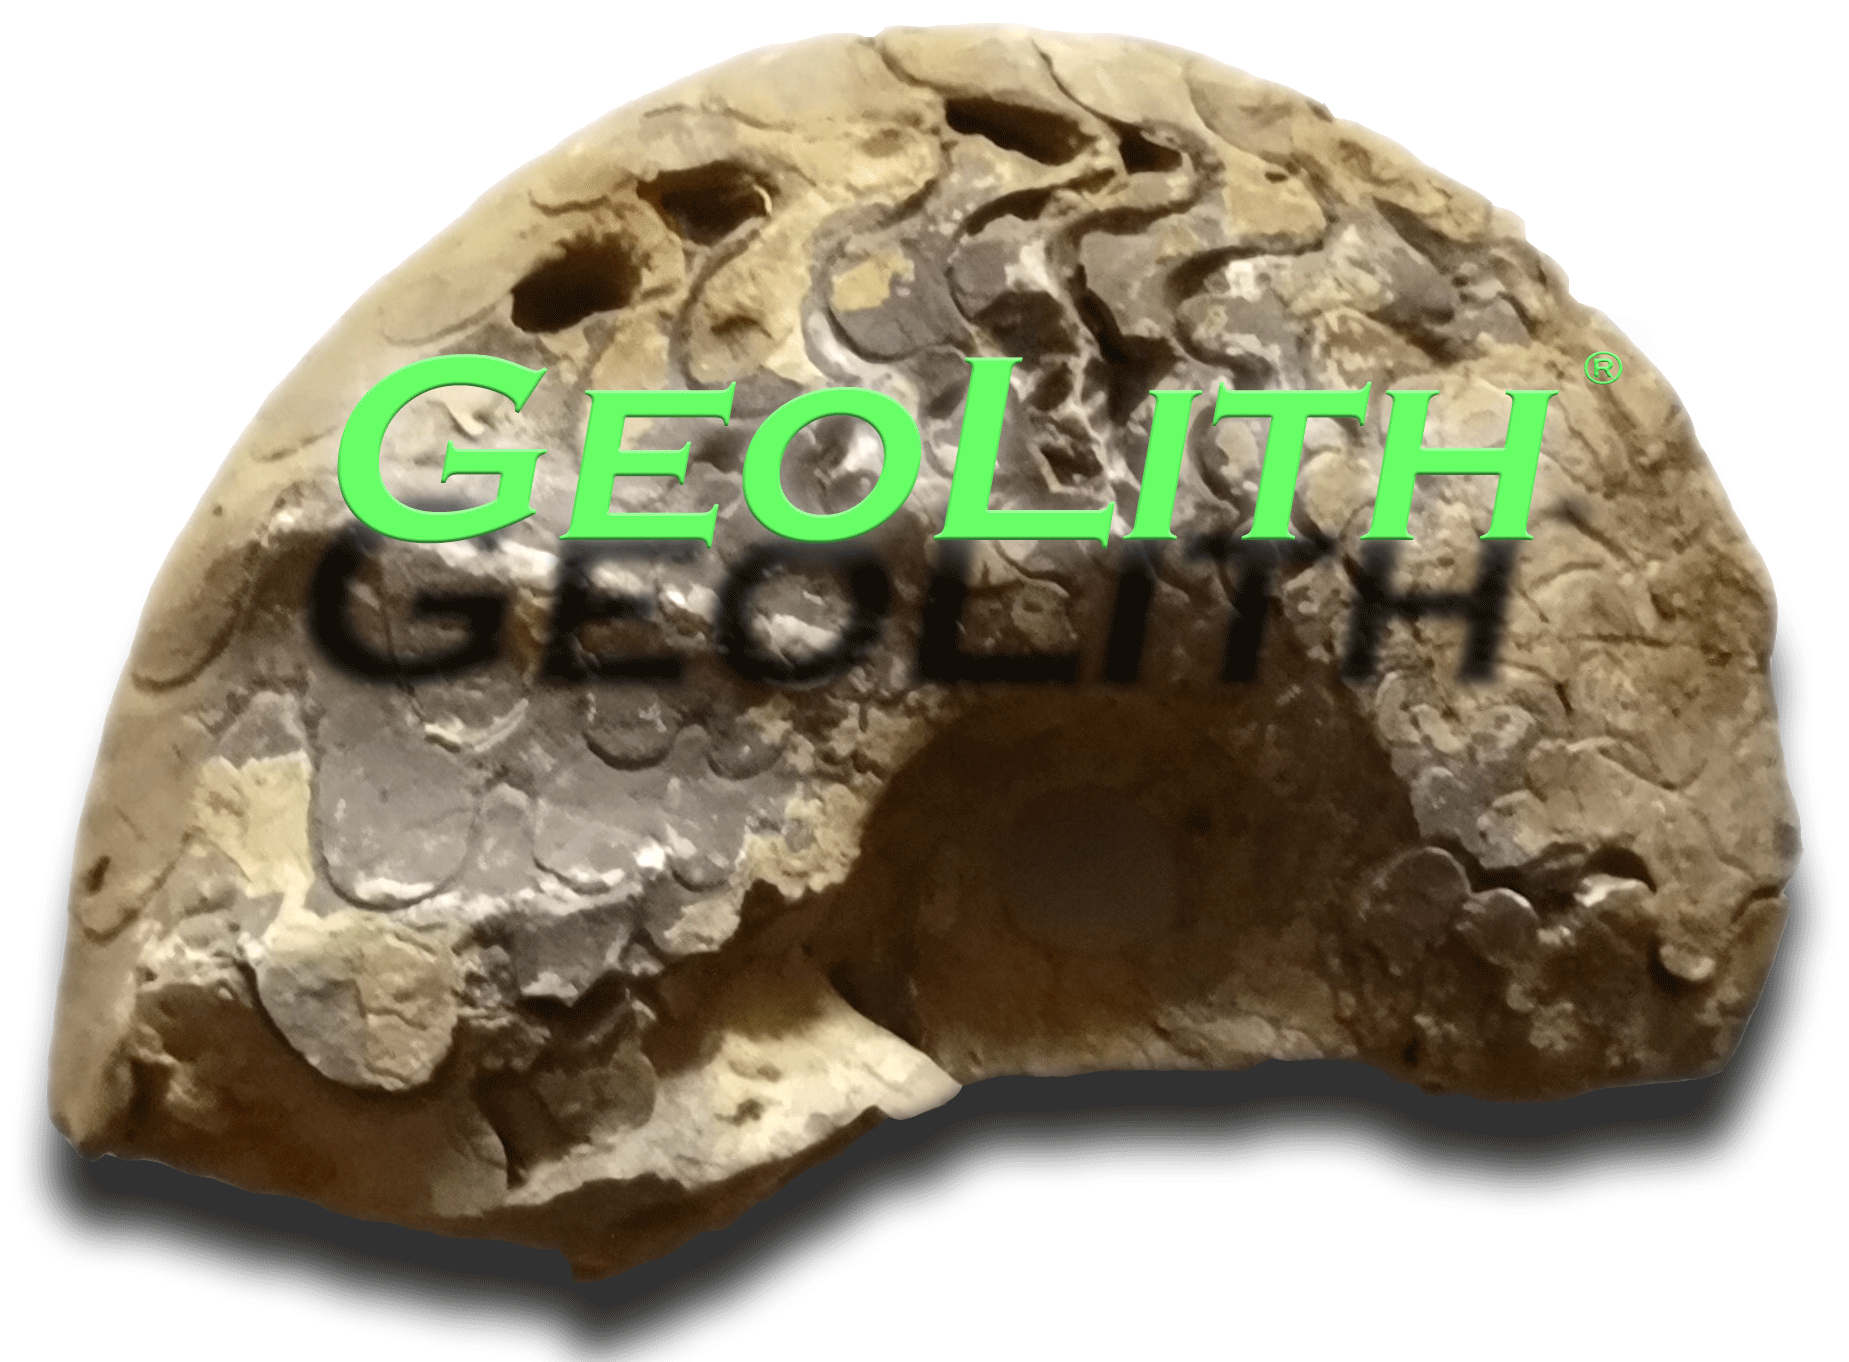 Geolith